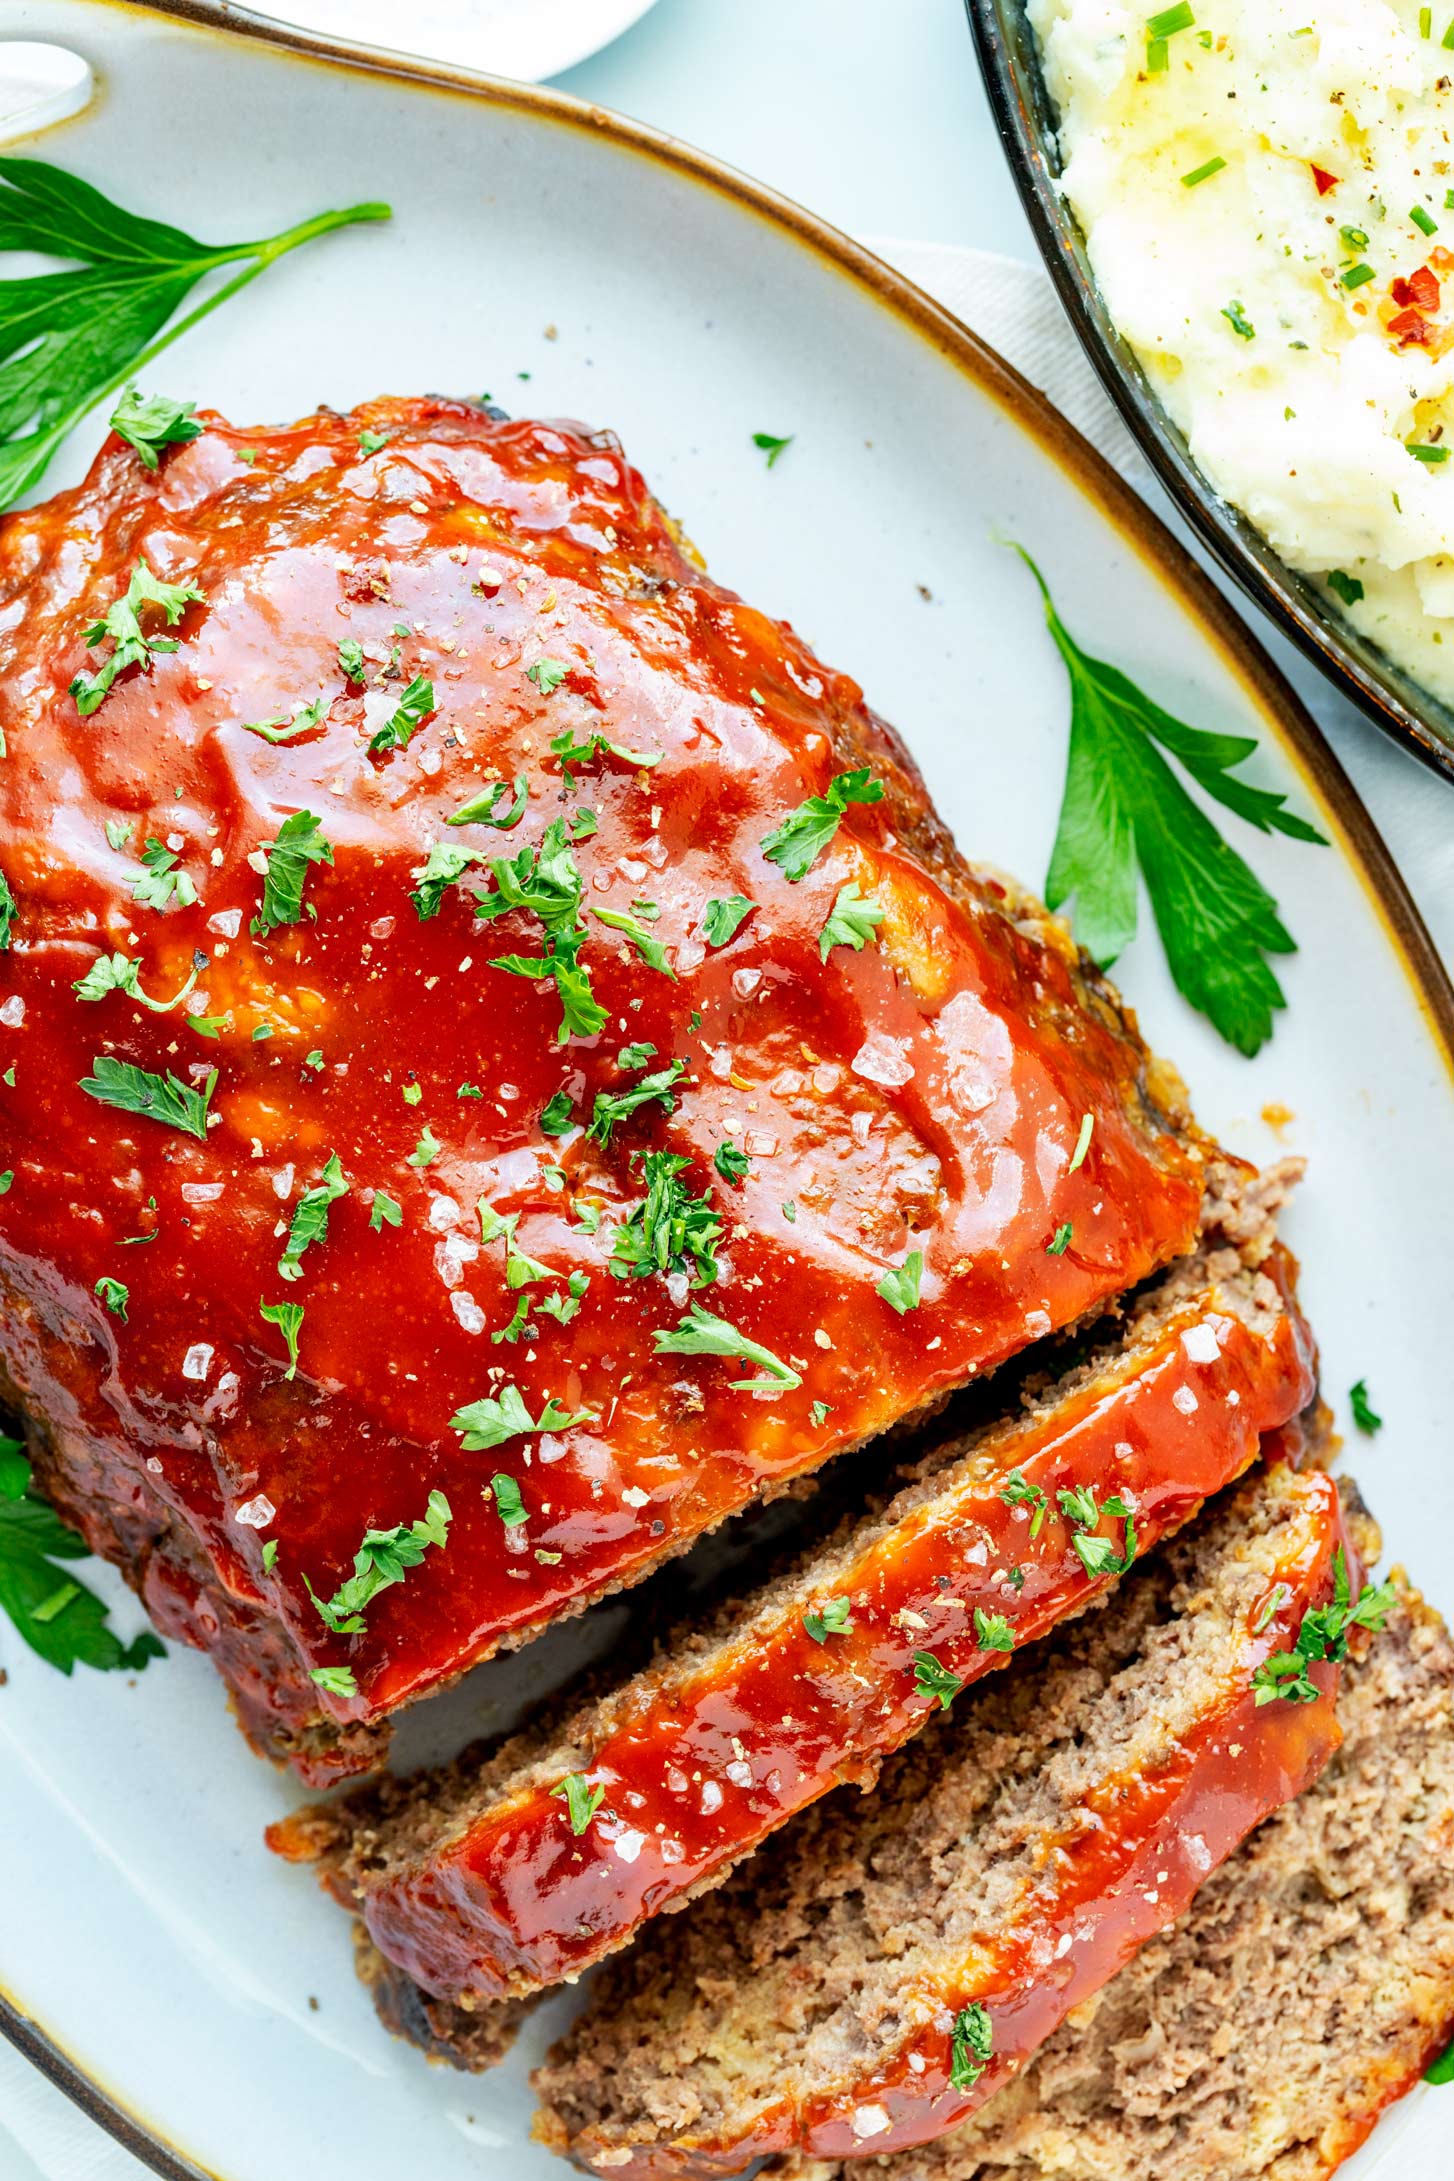 Overhead photo of a partially sliced slow cooker meatloaf on a serving platter.